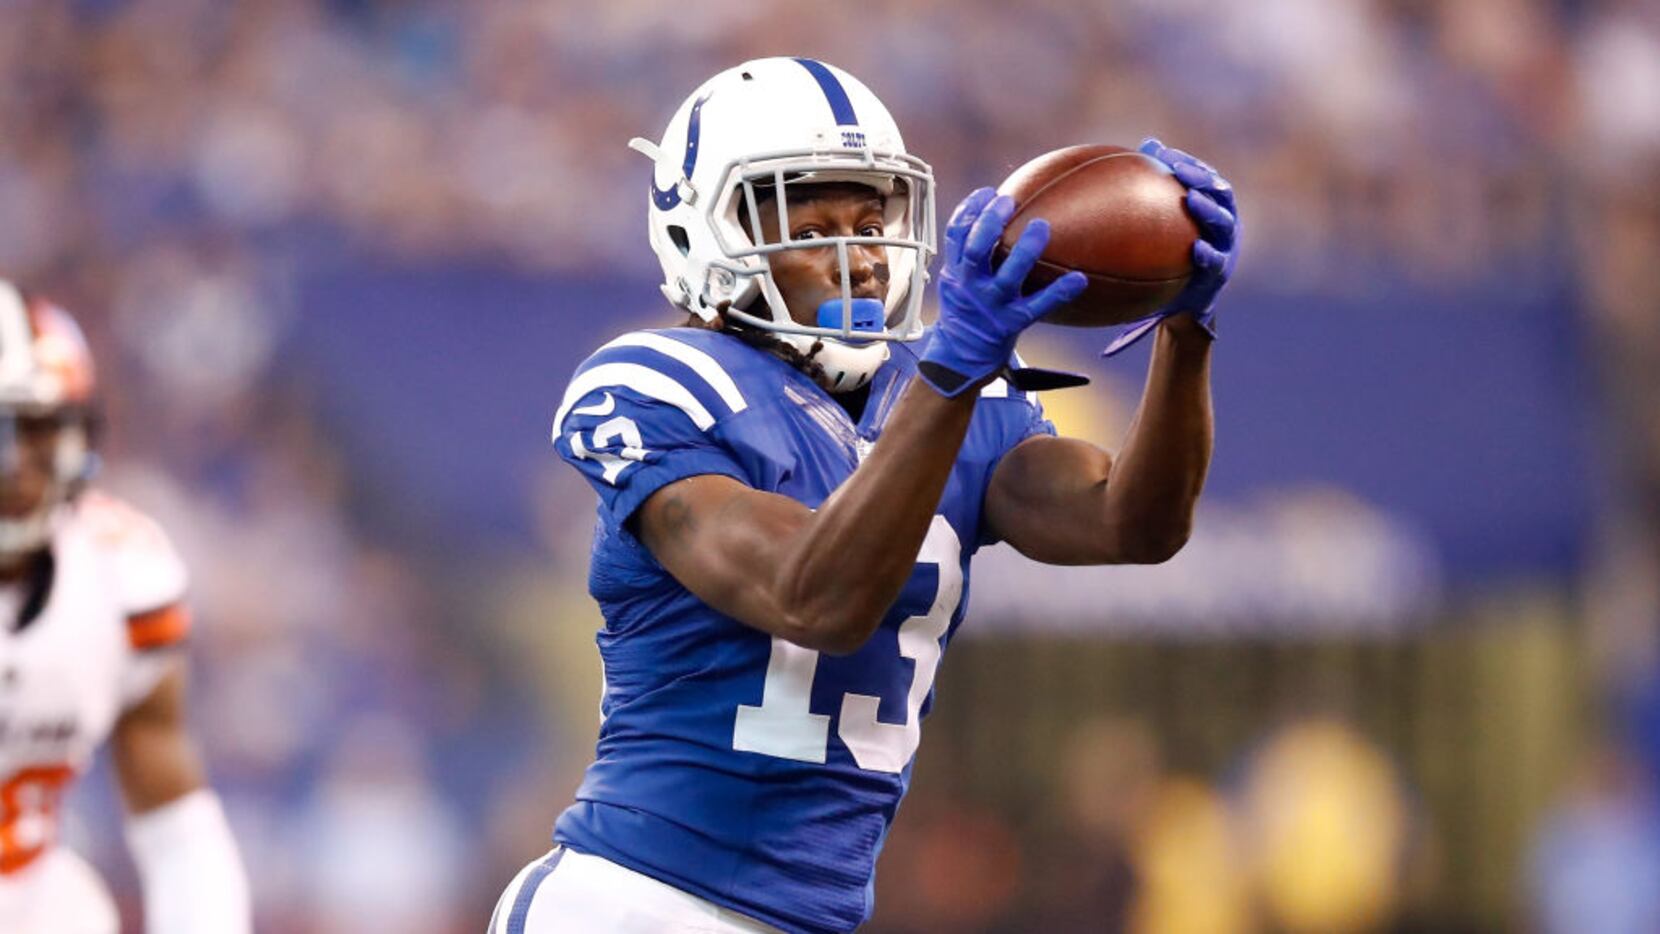 Cowboys sign former Colts WR T.Y. Hilton to one-year deal